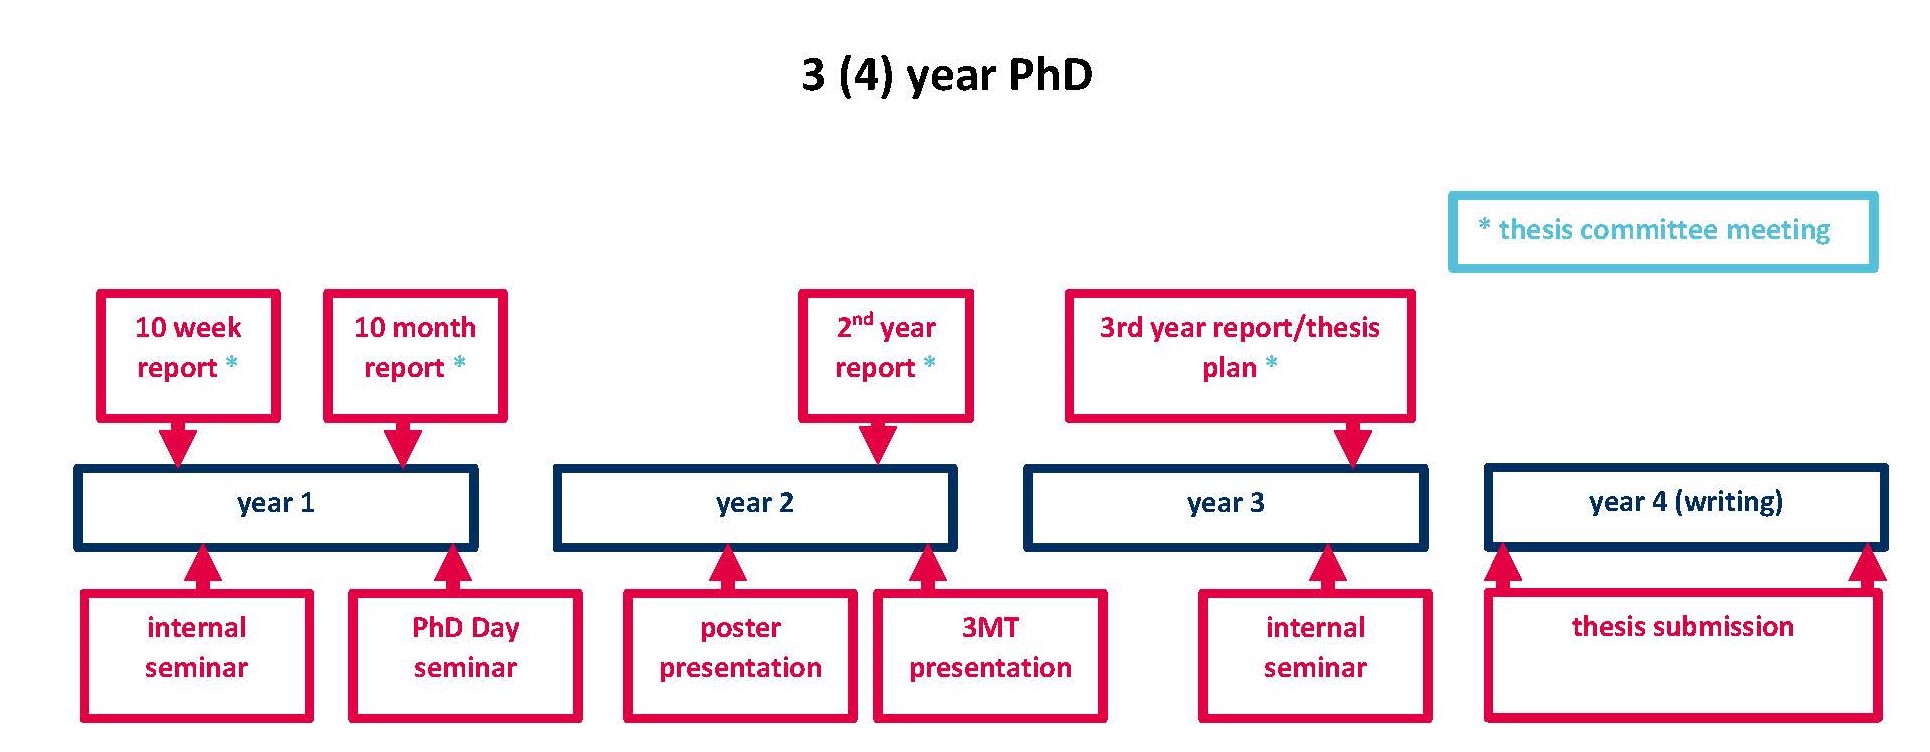 diagram of timeline of activities required at PhD level